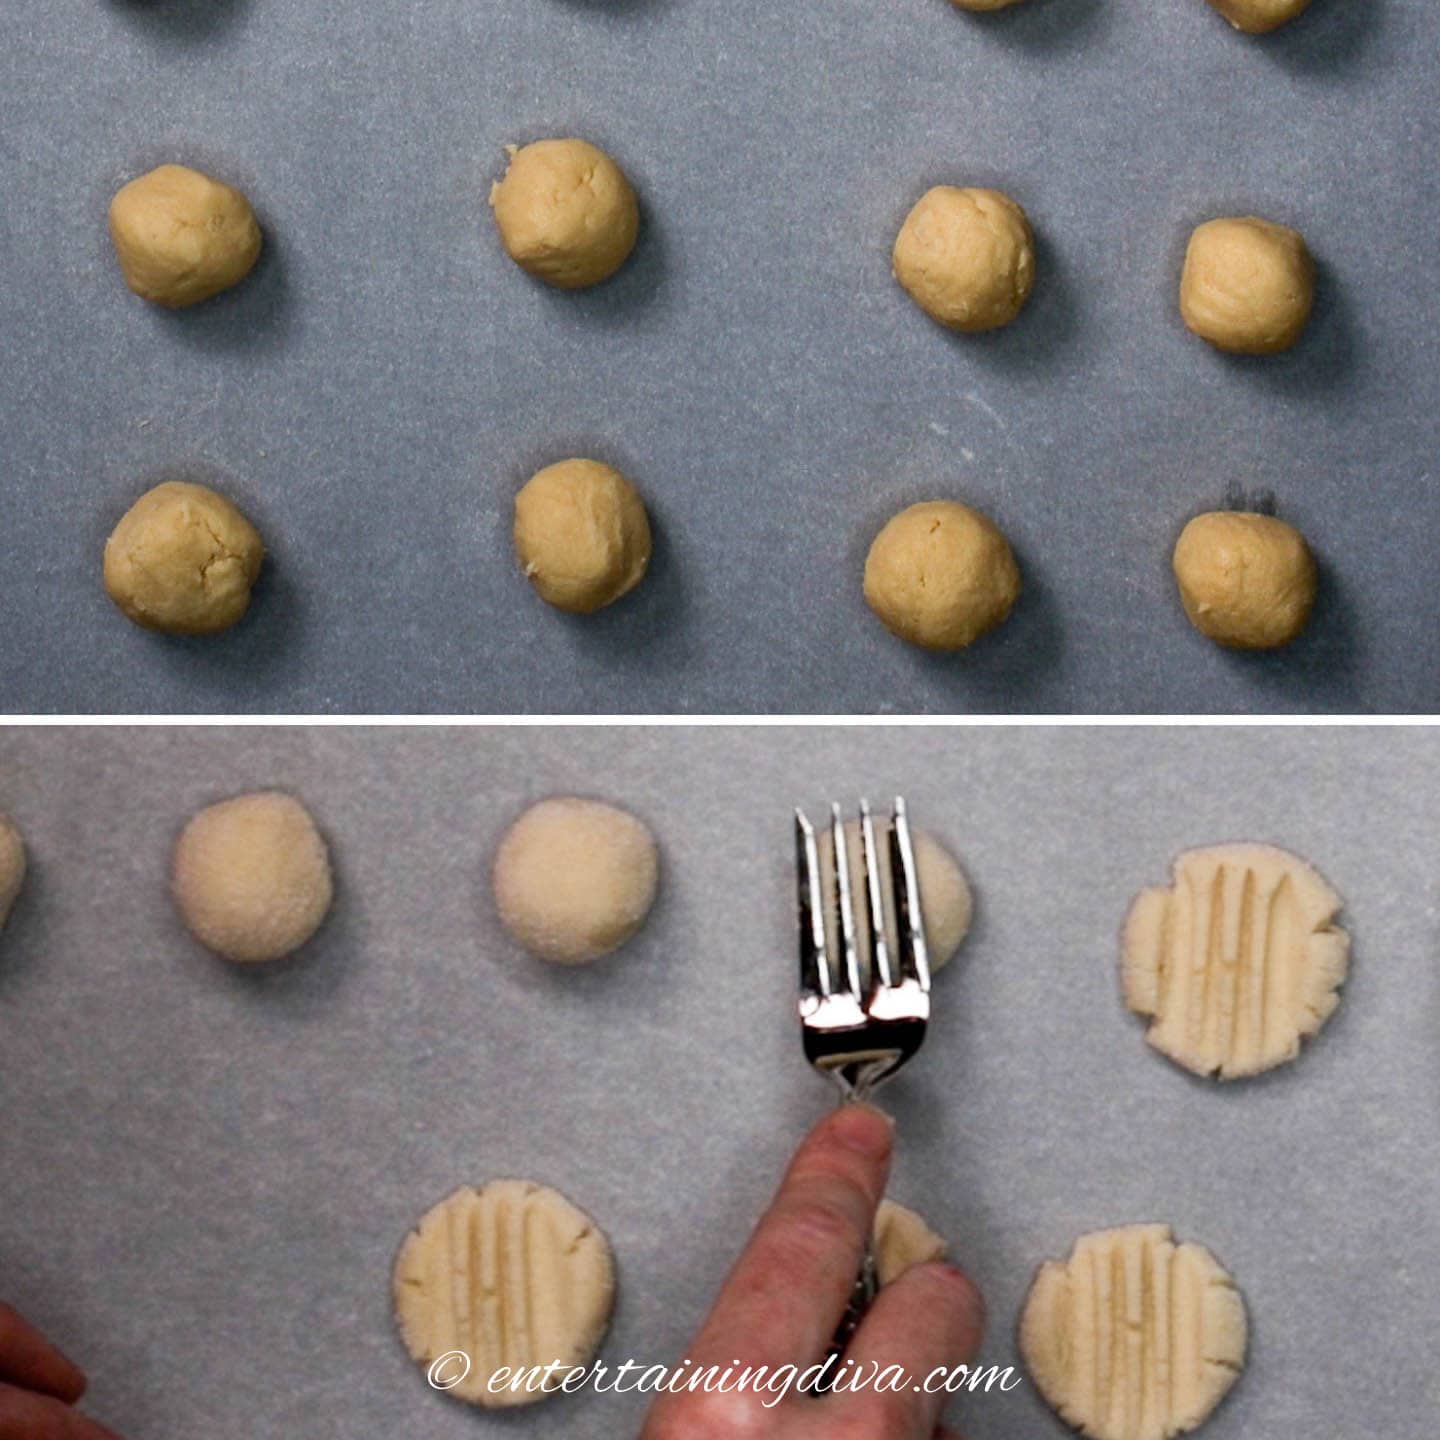 The whipped shortbread cookies on a baking sheet before cooking